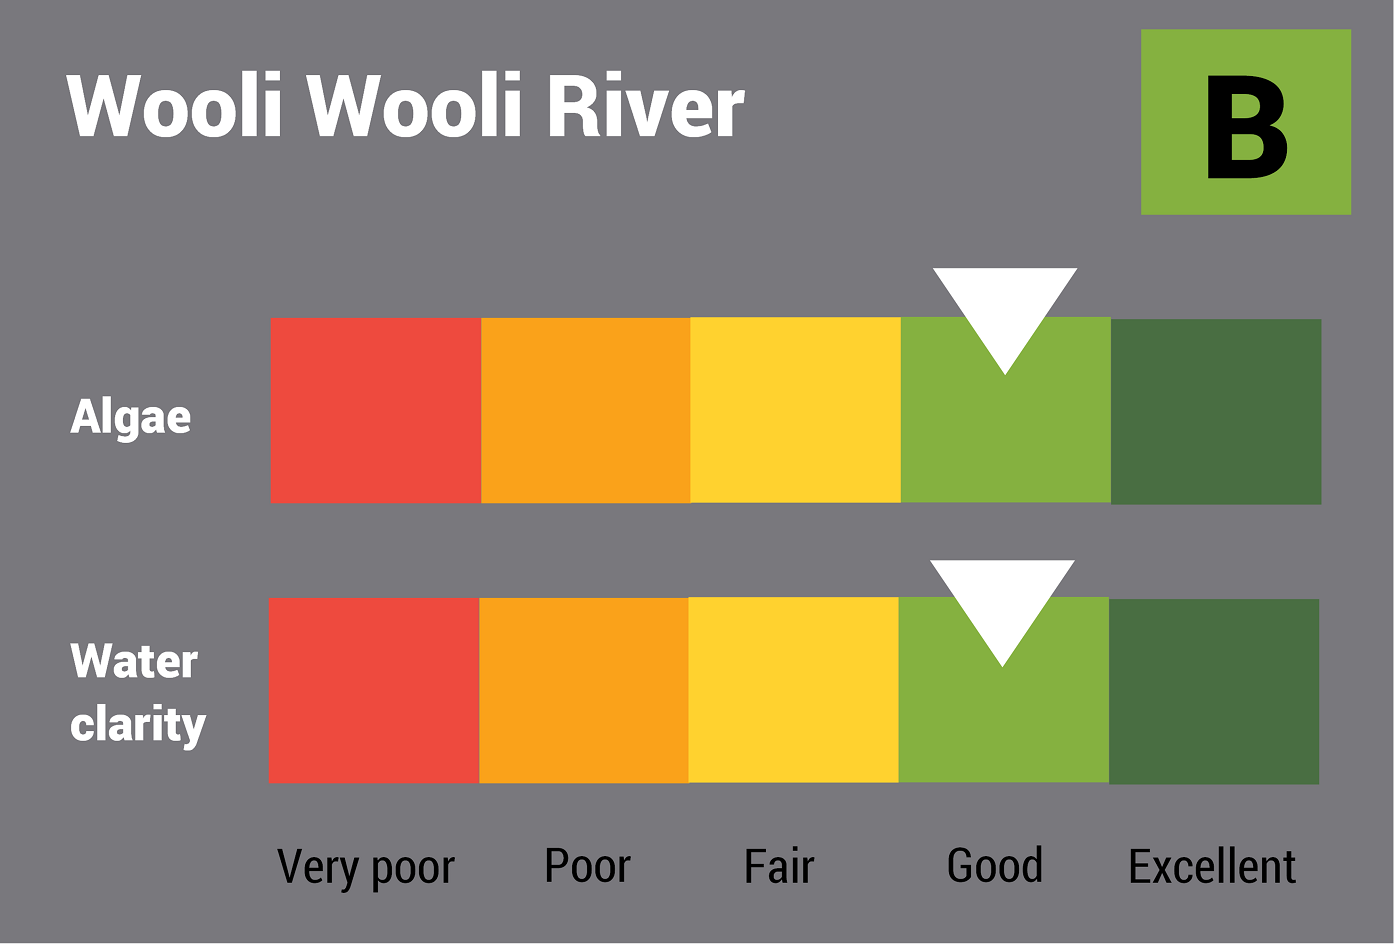 Wooli Wooli River water quality report card for algae and water clarity showing colour-coded ratings (red, orange, yellow, light green and dark green, which represent very poor, poor, fair, good and excellent, respectively). Algae is rated 'good' and water clarity is rated 'good' giving an overall rating of 'good' or 'B'.